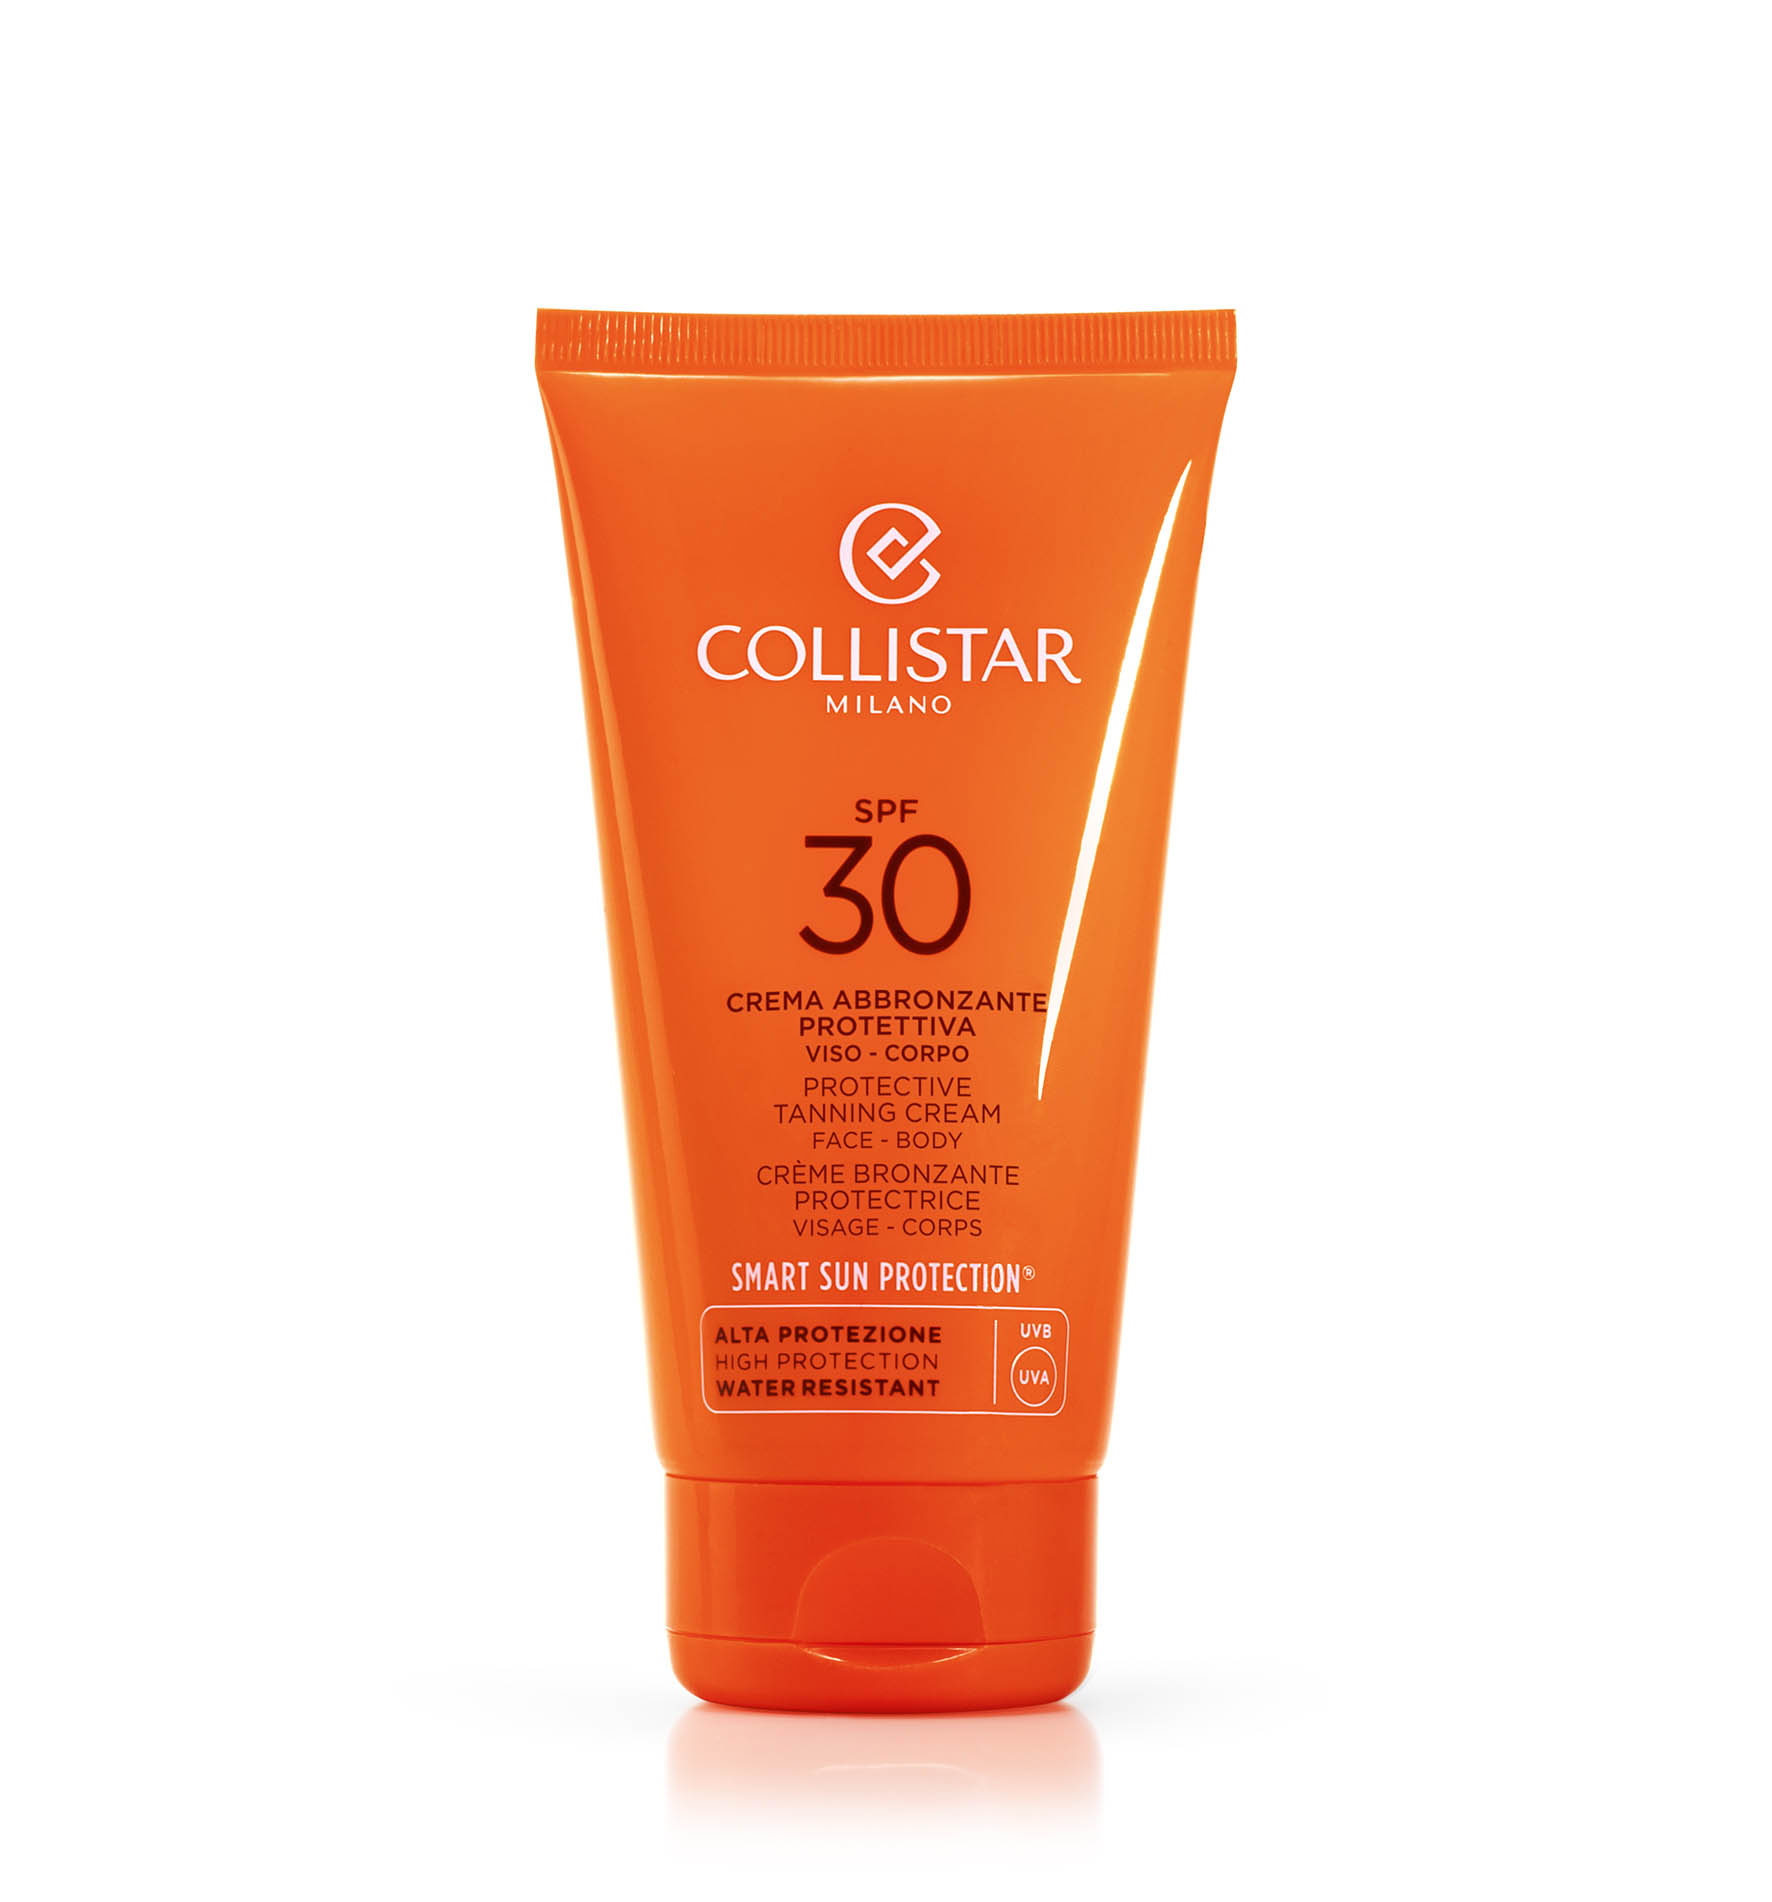 ULTRA PROTECTION TANNING CREAM FACE - BODY SPF 30 - PROTECTION | Collistar - Shop Online Ufficiale